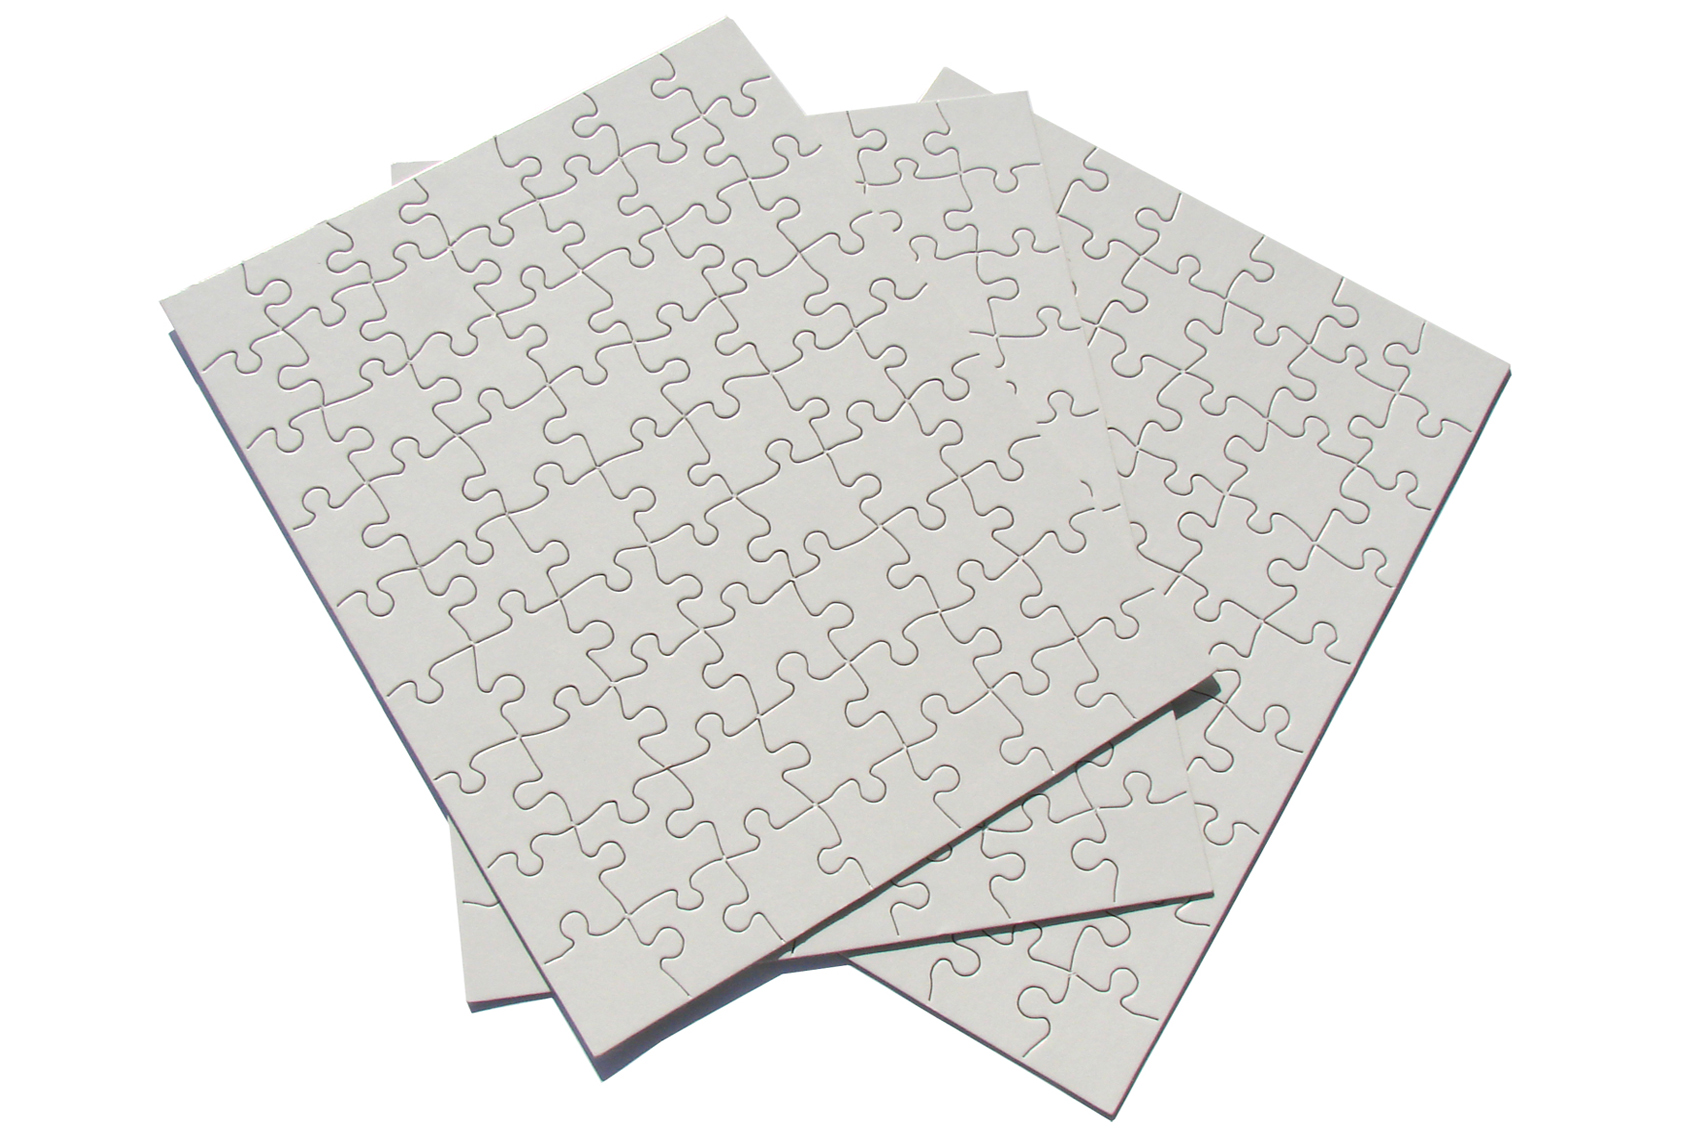 Blank Puzzles With Envelopes, Rectangle Jigsaw Puzzle